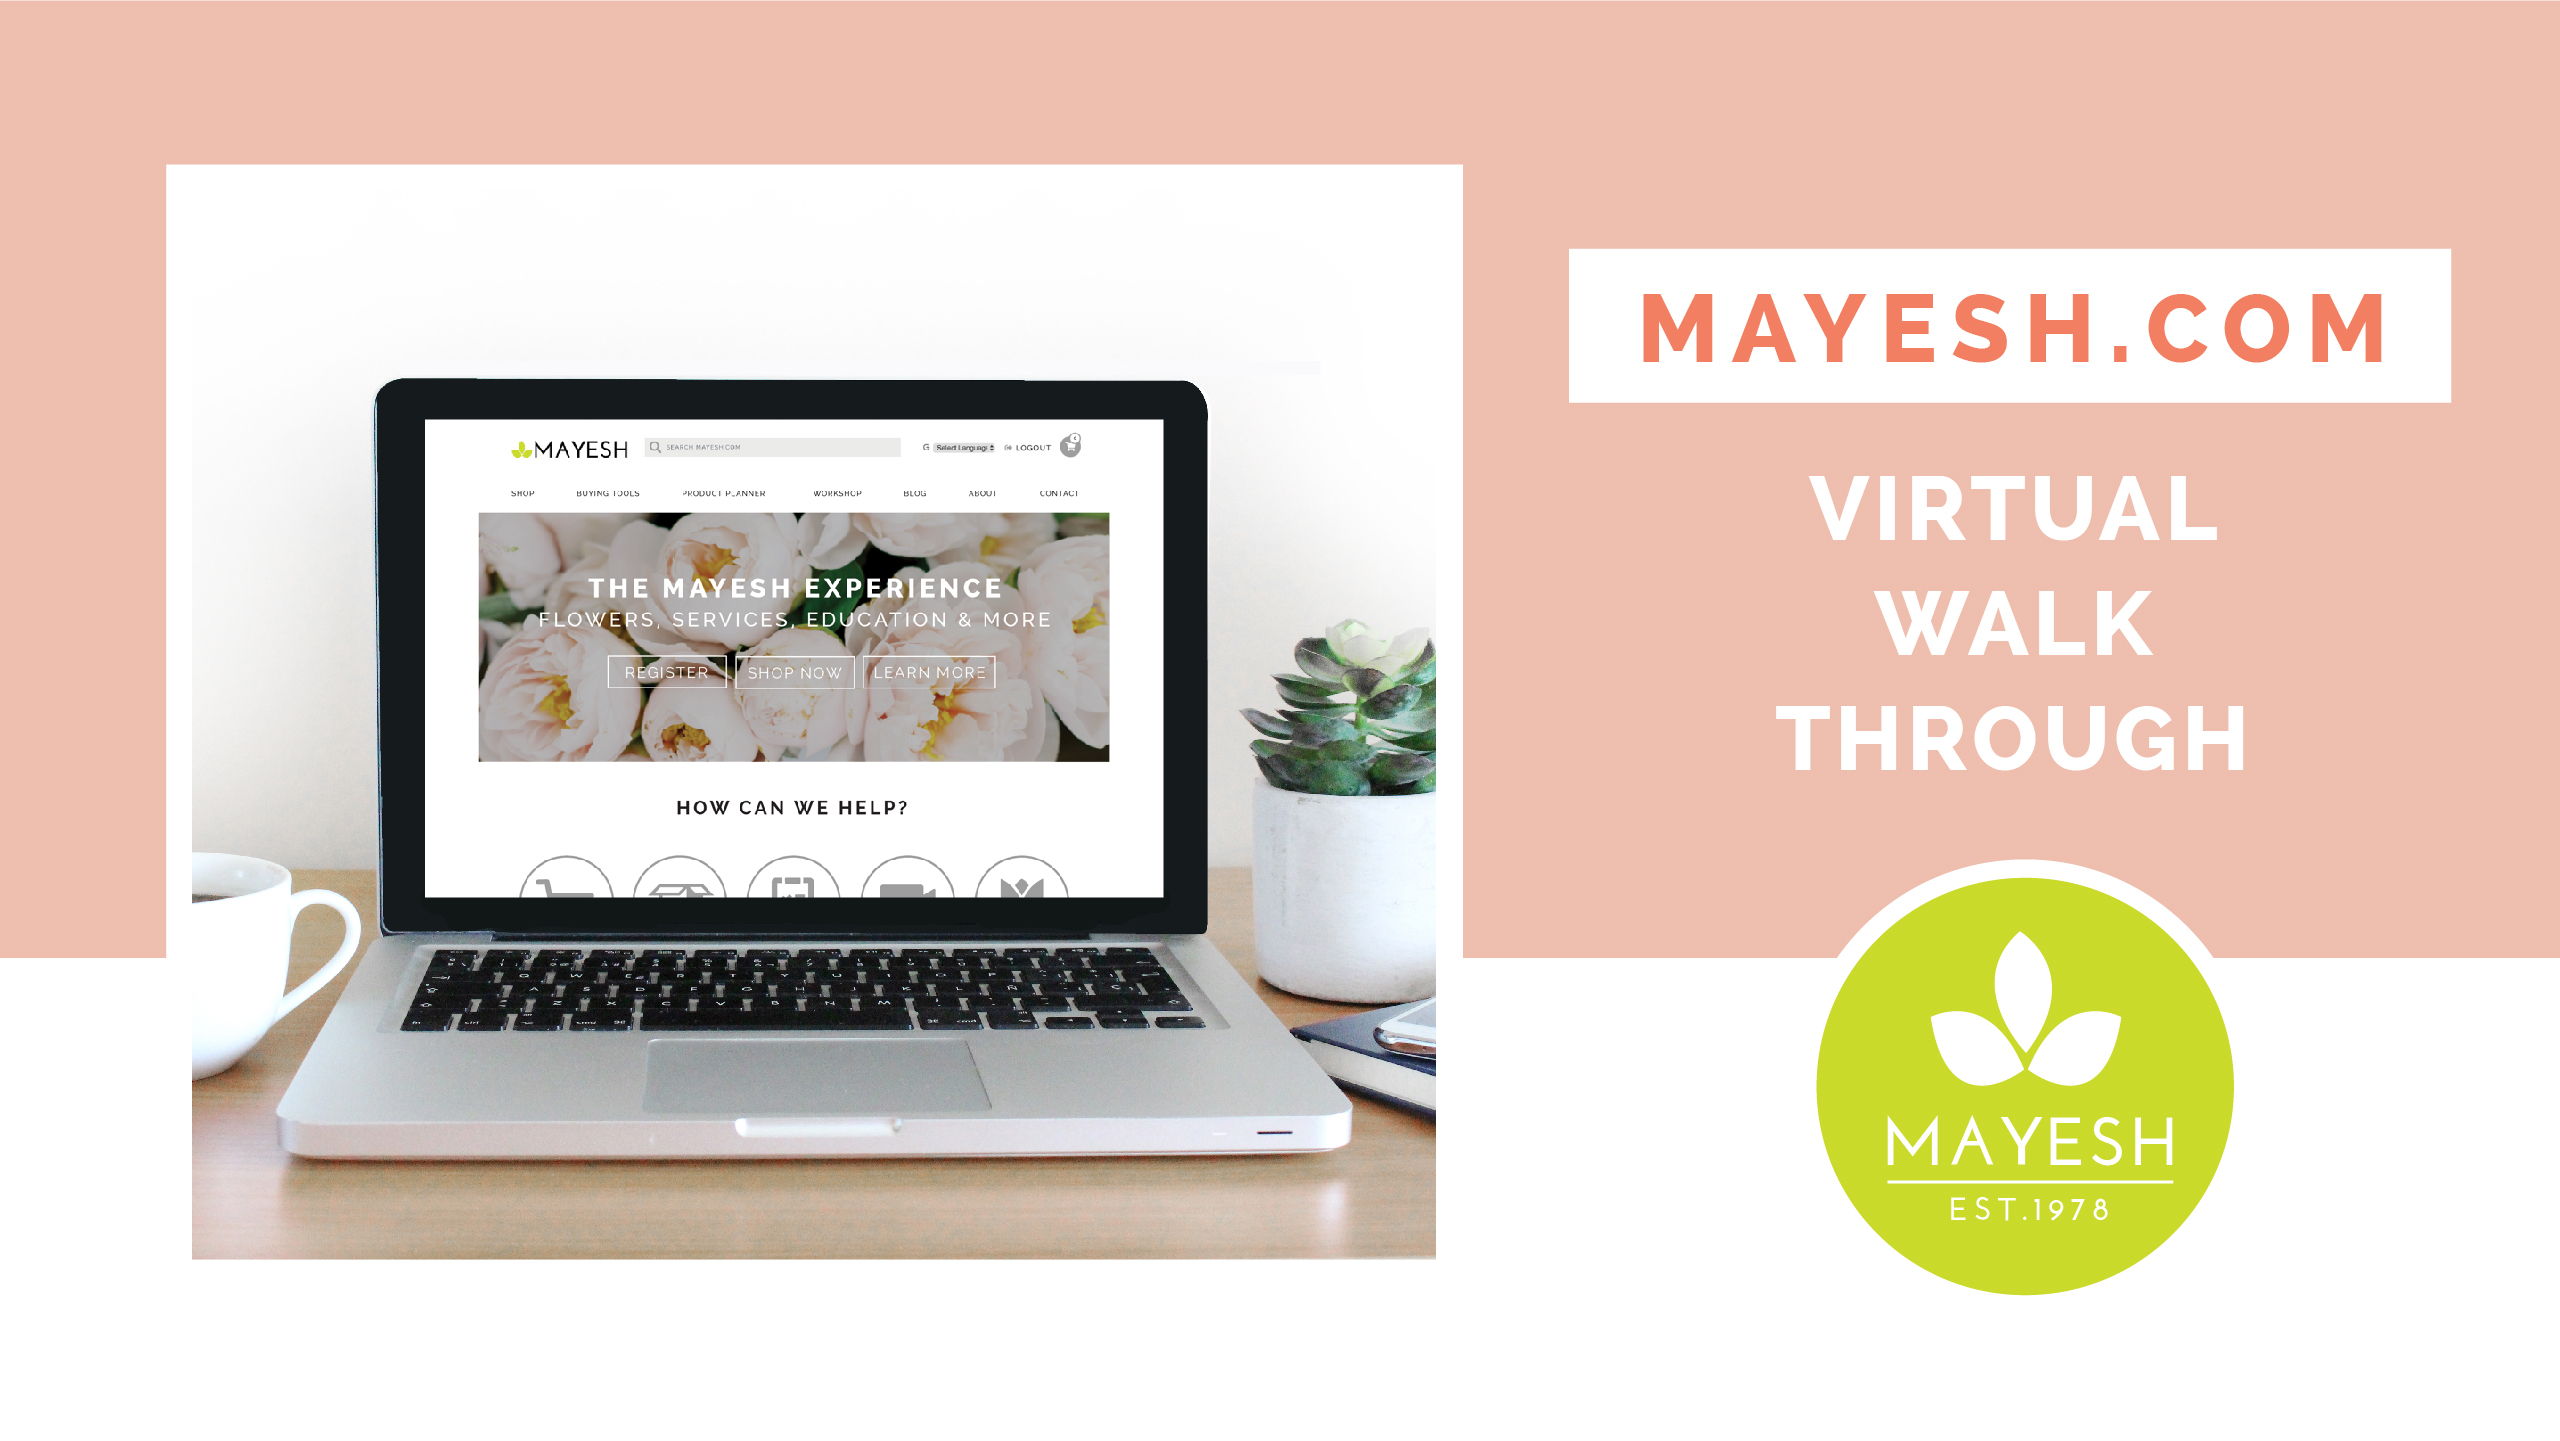 The NEW mayesh.com is Here